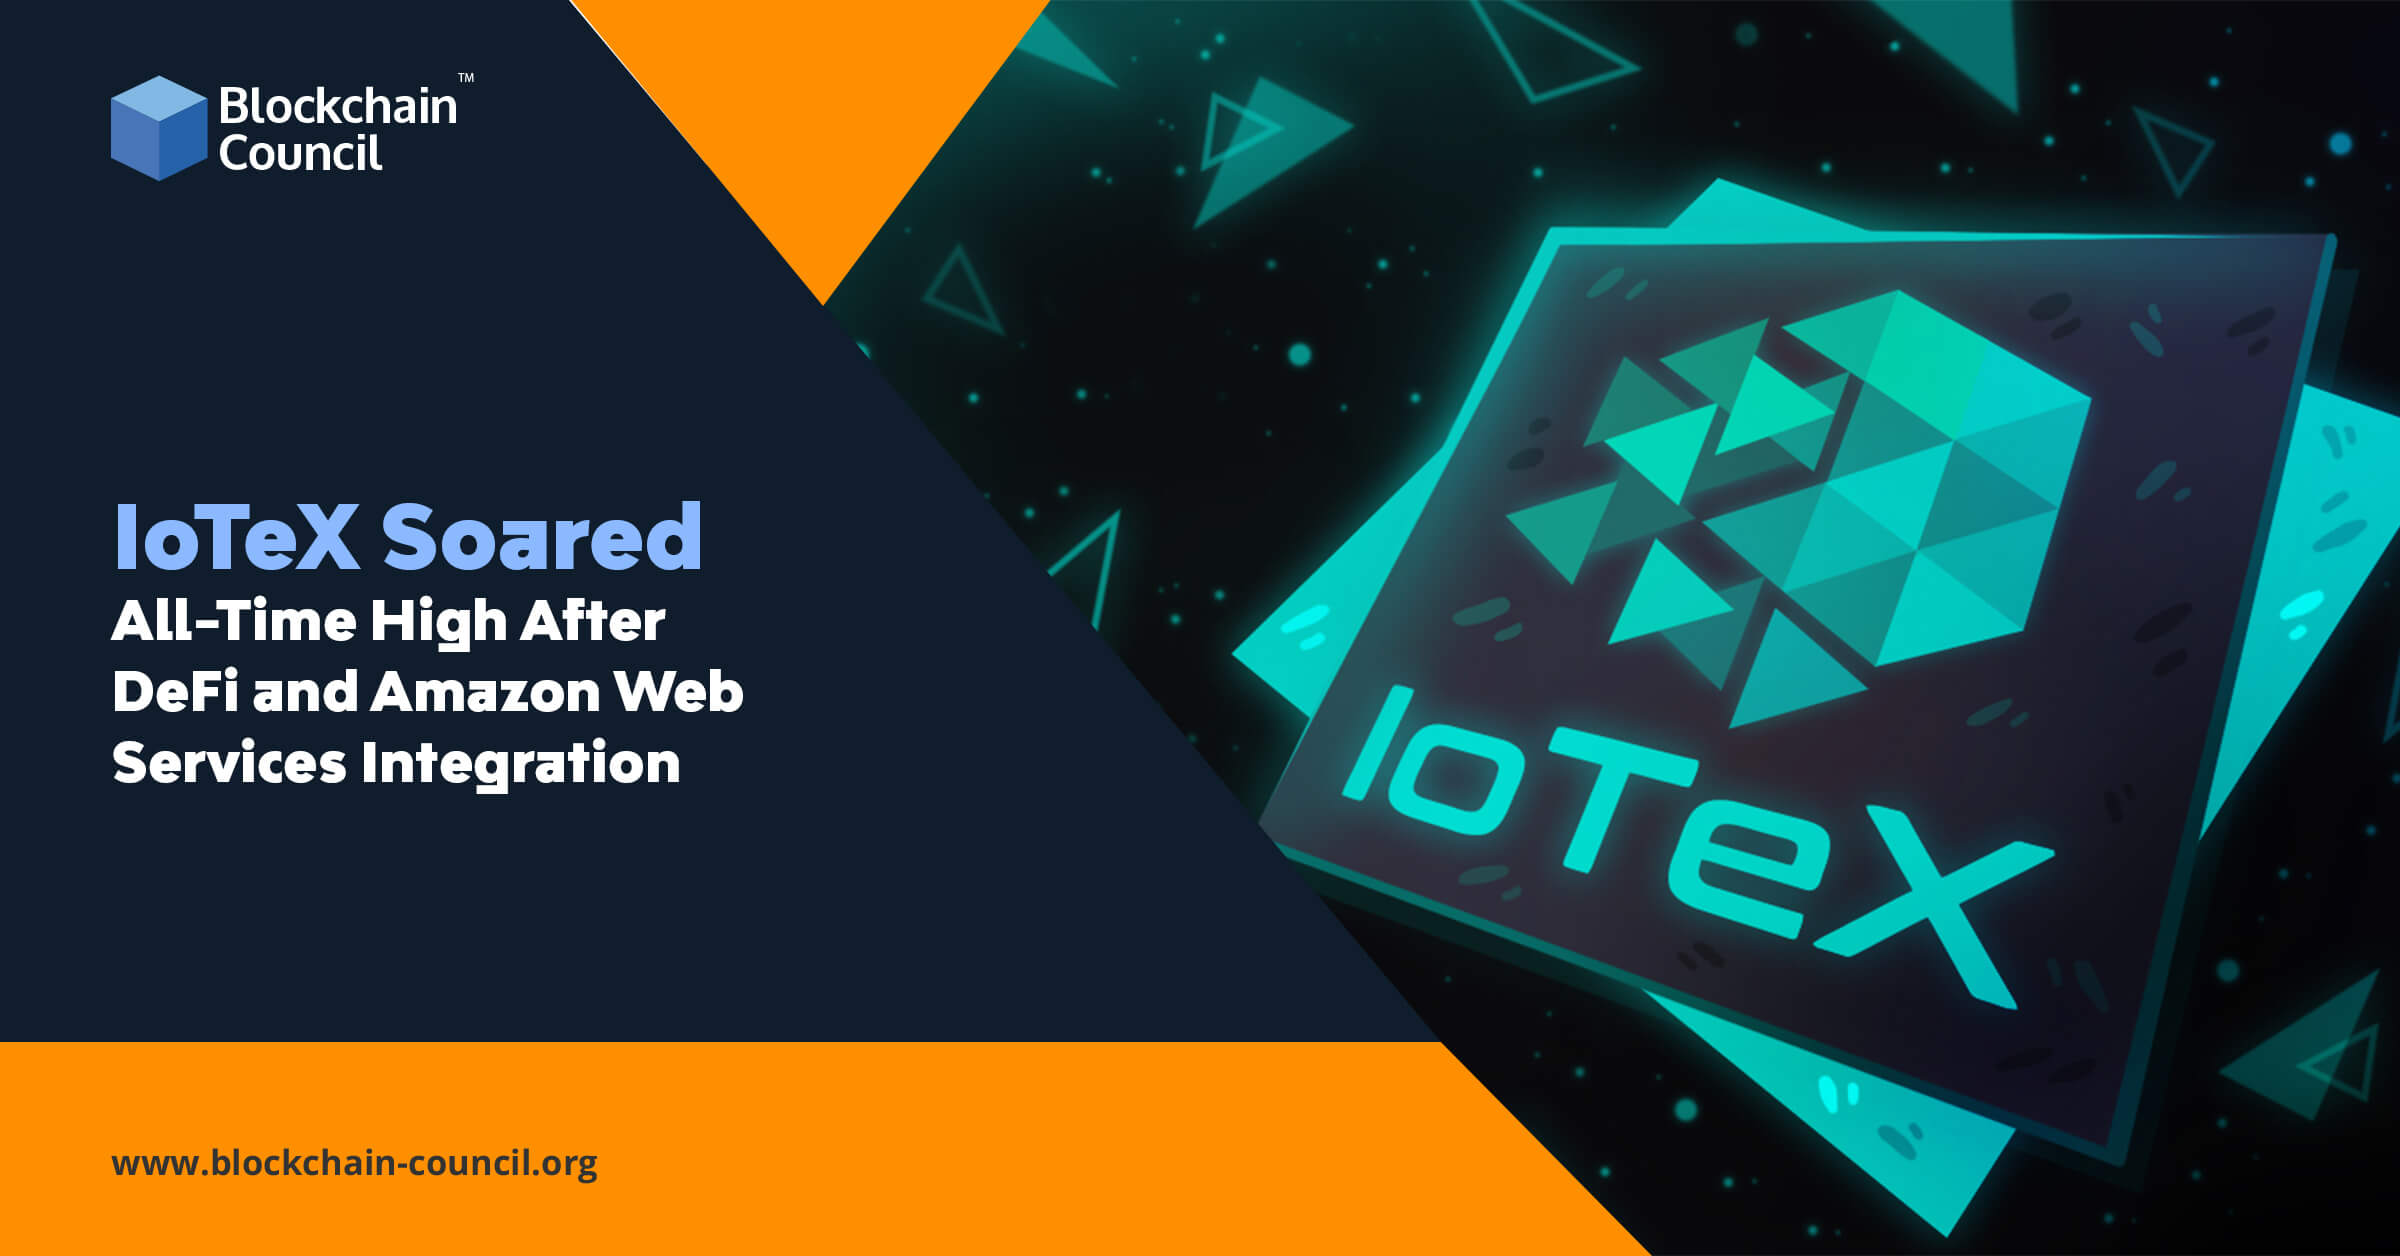 IoTeX Soared All-Time High After DeFi and Amazon Web Services Integration